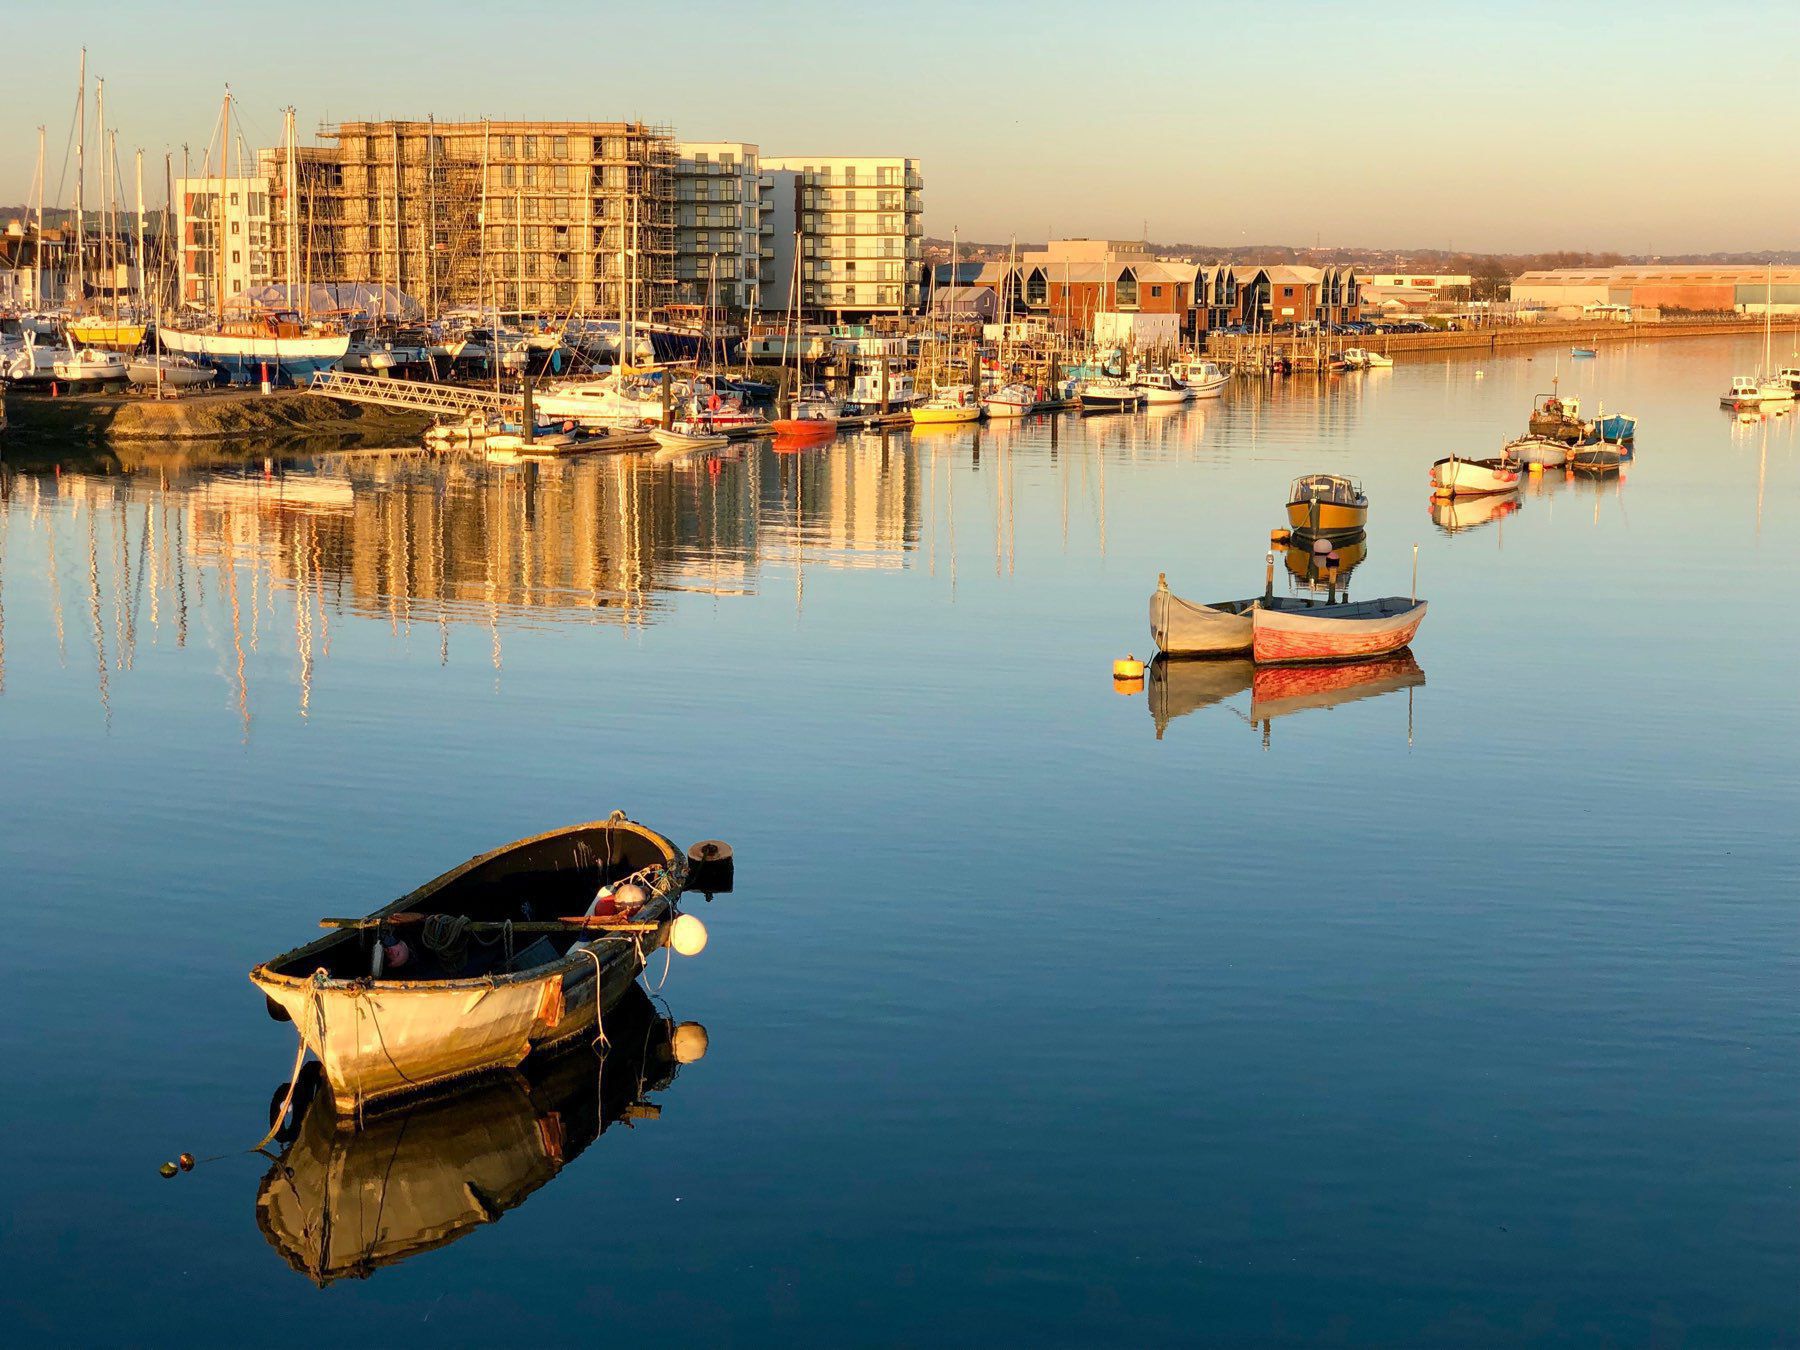 Evening light on boats in the river Adur